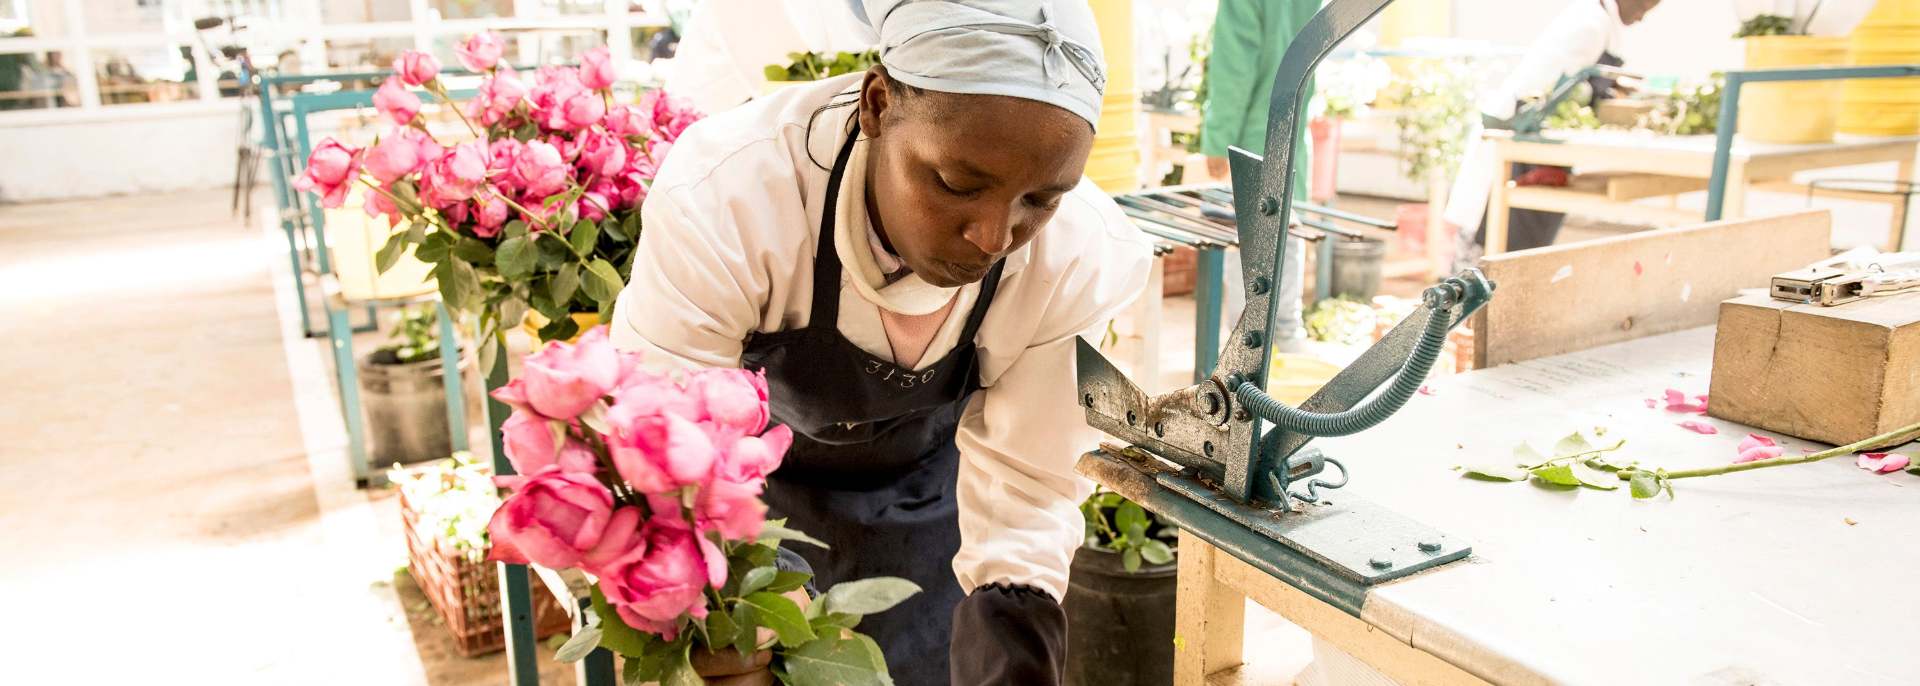 A manual for strengthening women’s leadership in the horticultural sector